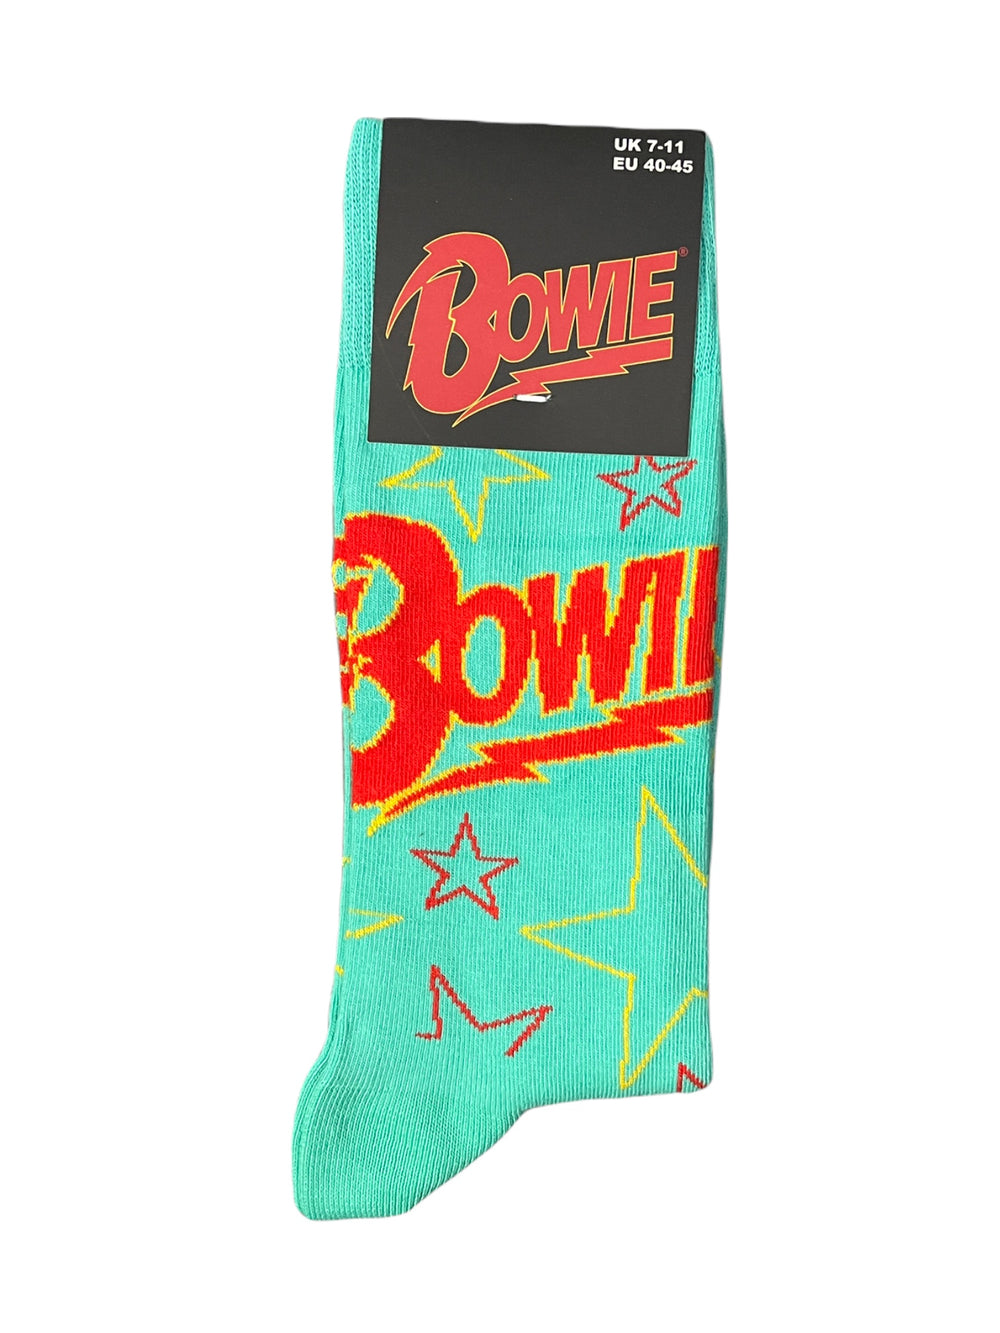 David Bowie STARS GREEN Official Product 1 Pair Jacquard Socks Brand New